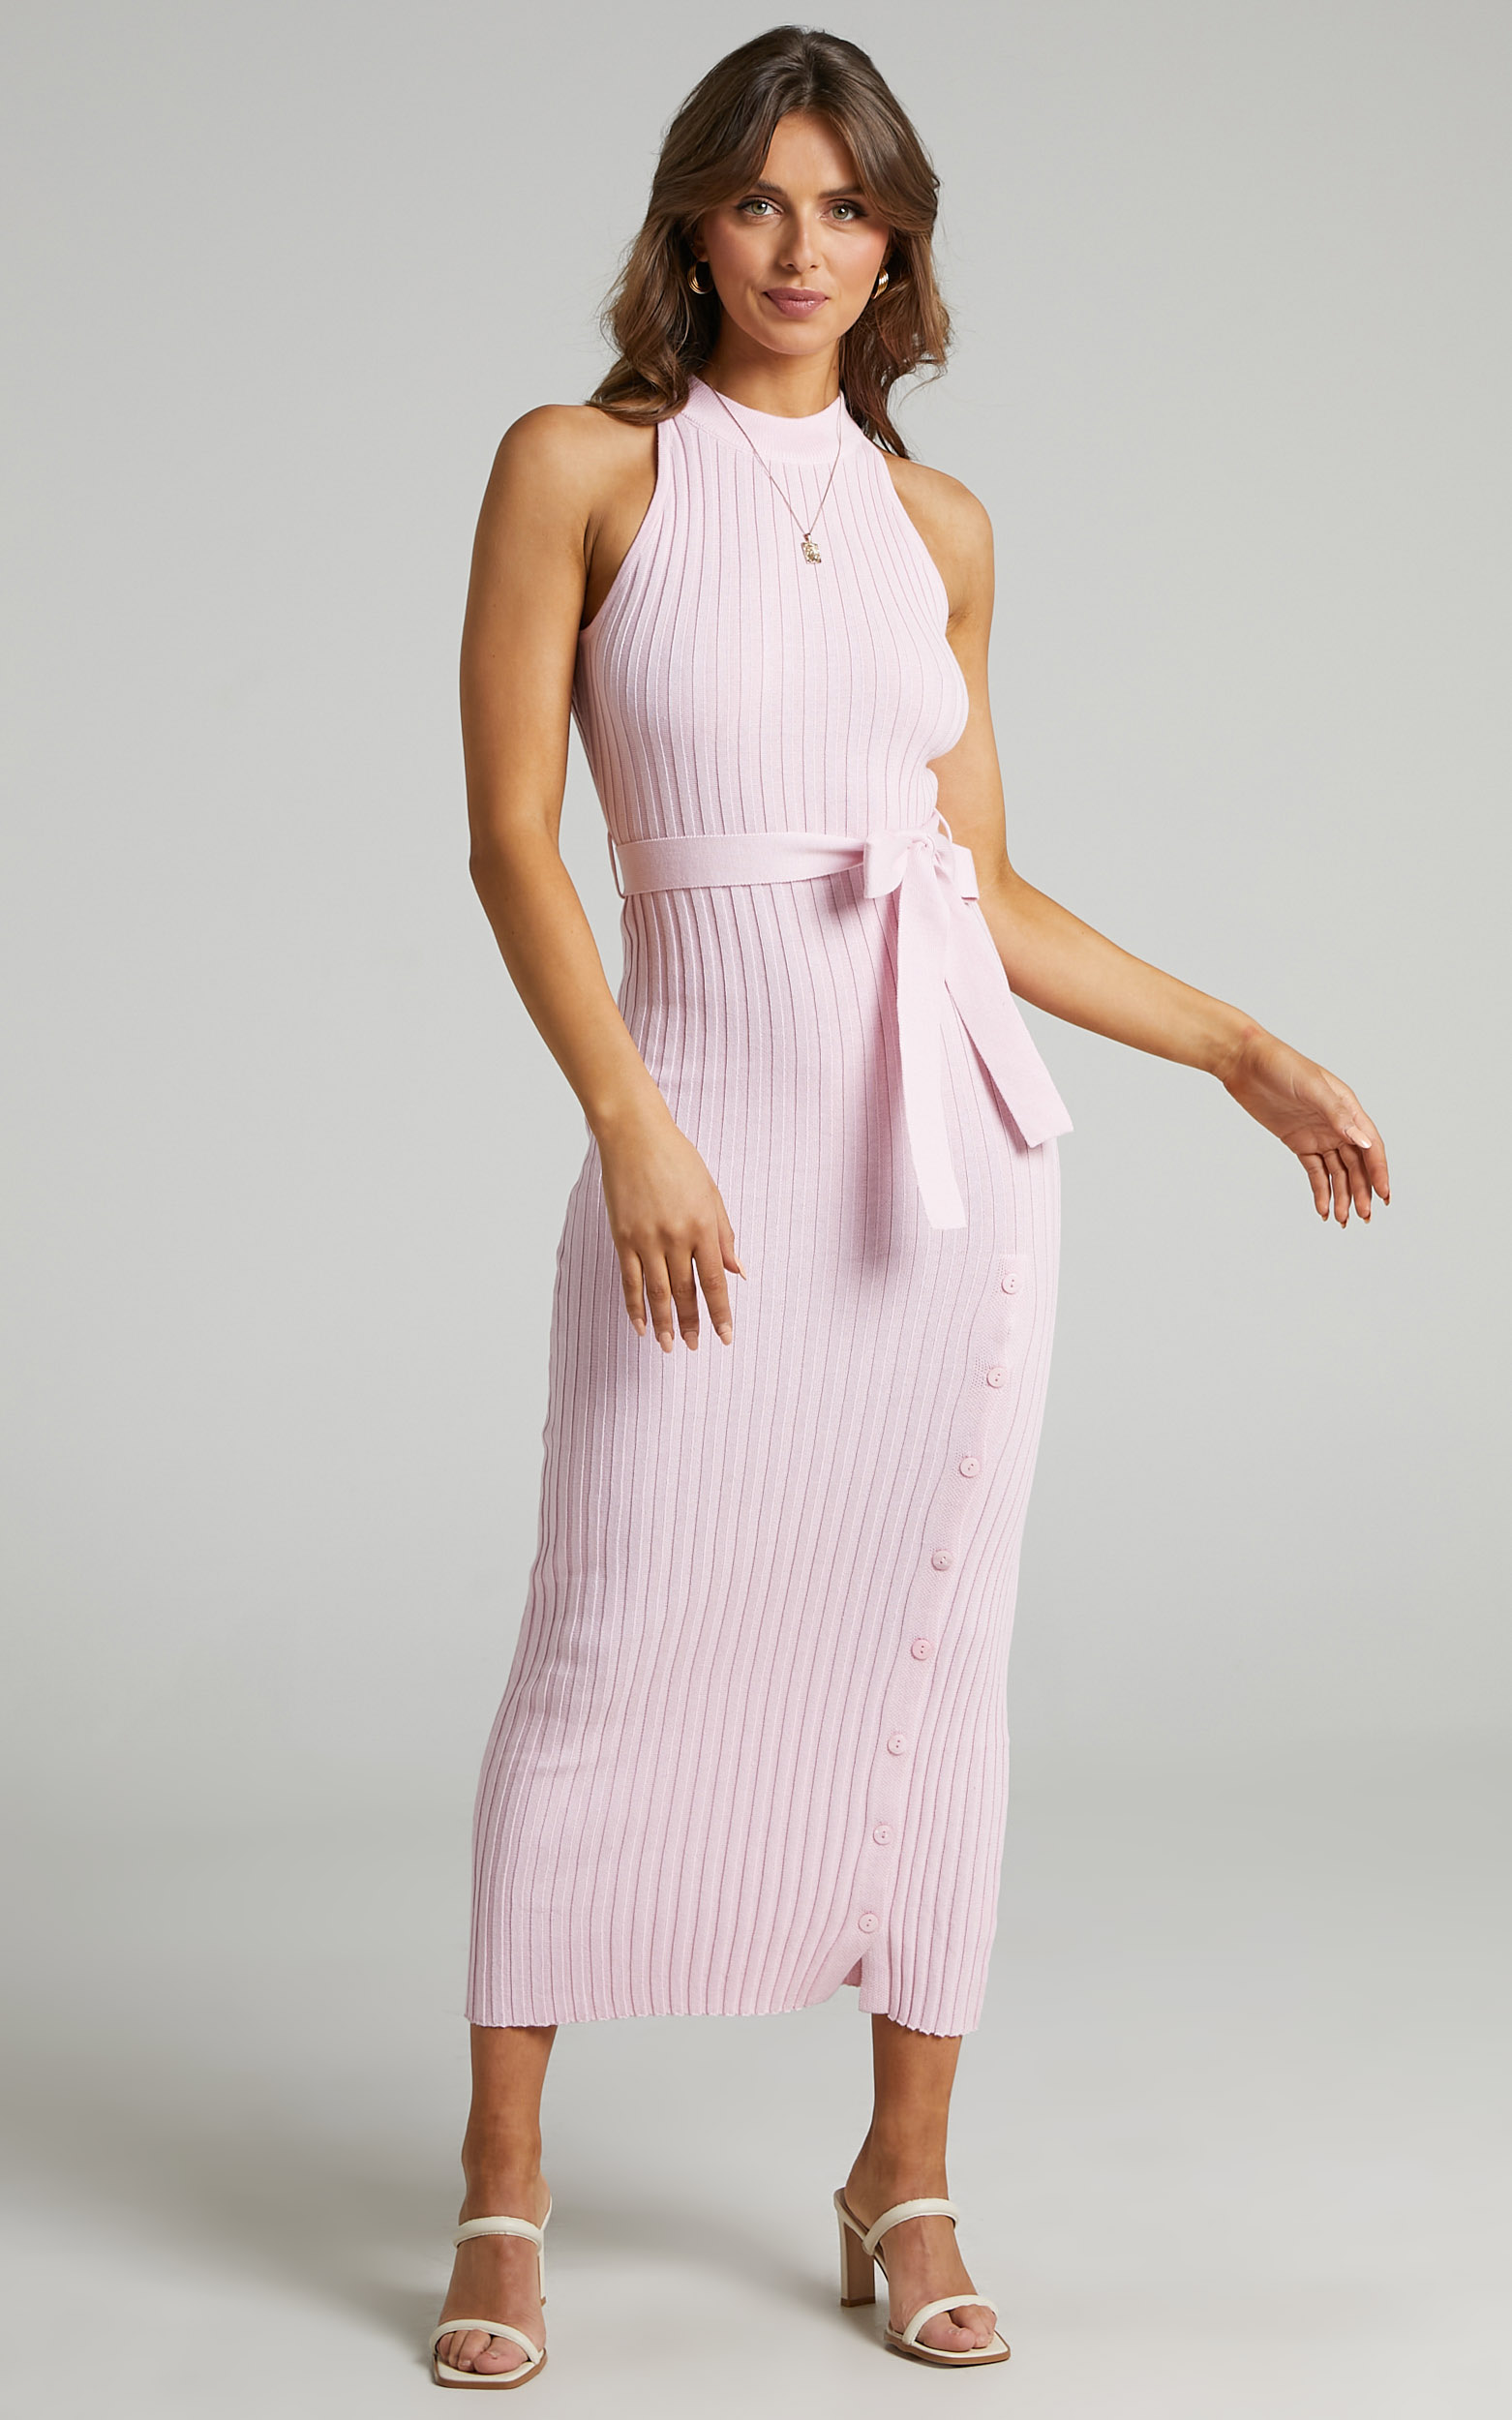 Verona High Neck Maxi Knit Dress with Button Up Split in Ice Pink - 06, PNK1, hi-res image number null